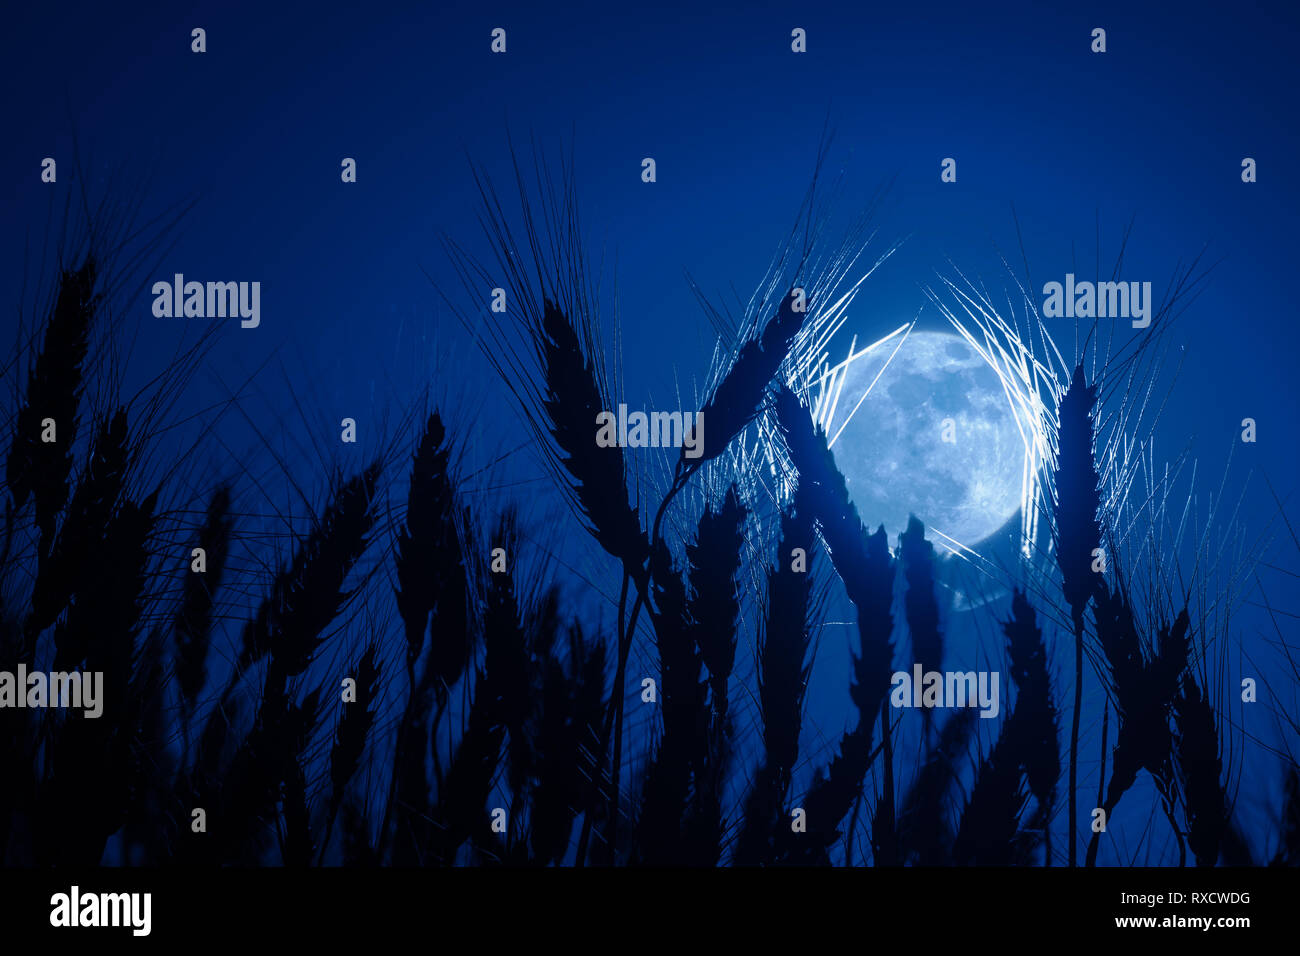 Silhouetts wheat in background of full moon, night agricultural landscape Stock Photo